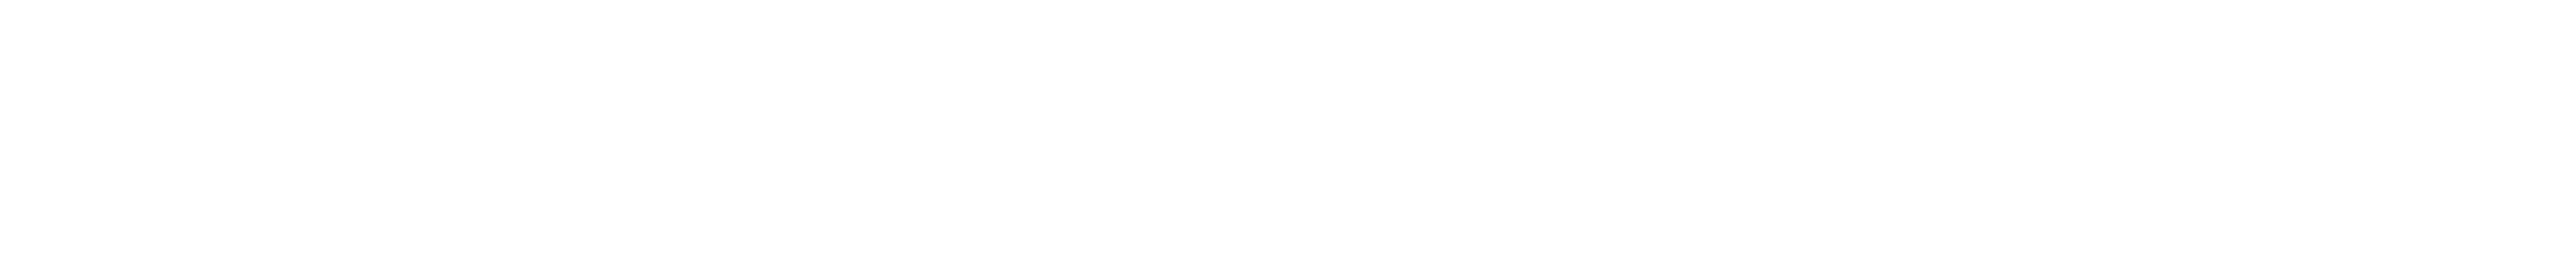 Intergroup Dialogue Project